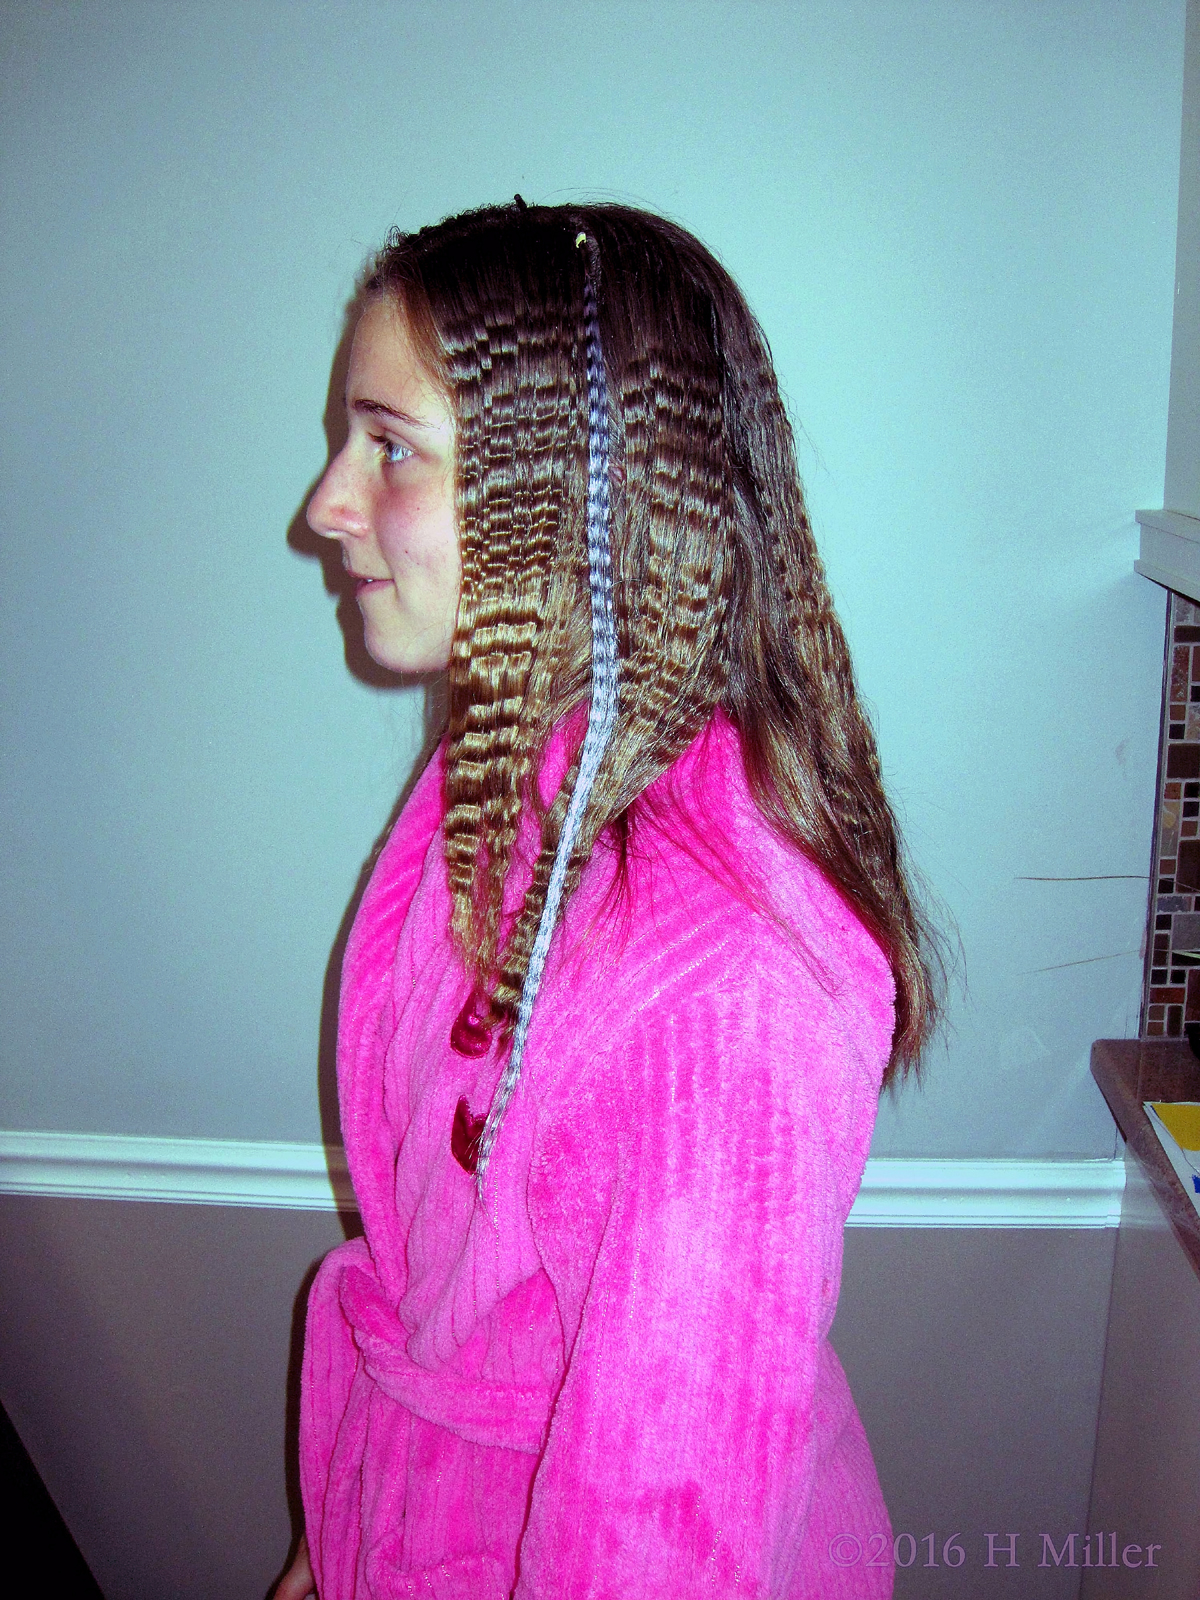 Cool Crimped Hairstyle And Extension